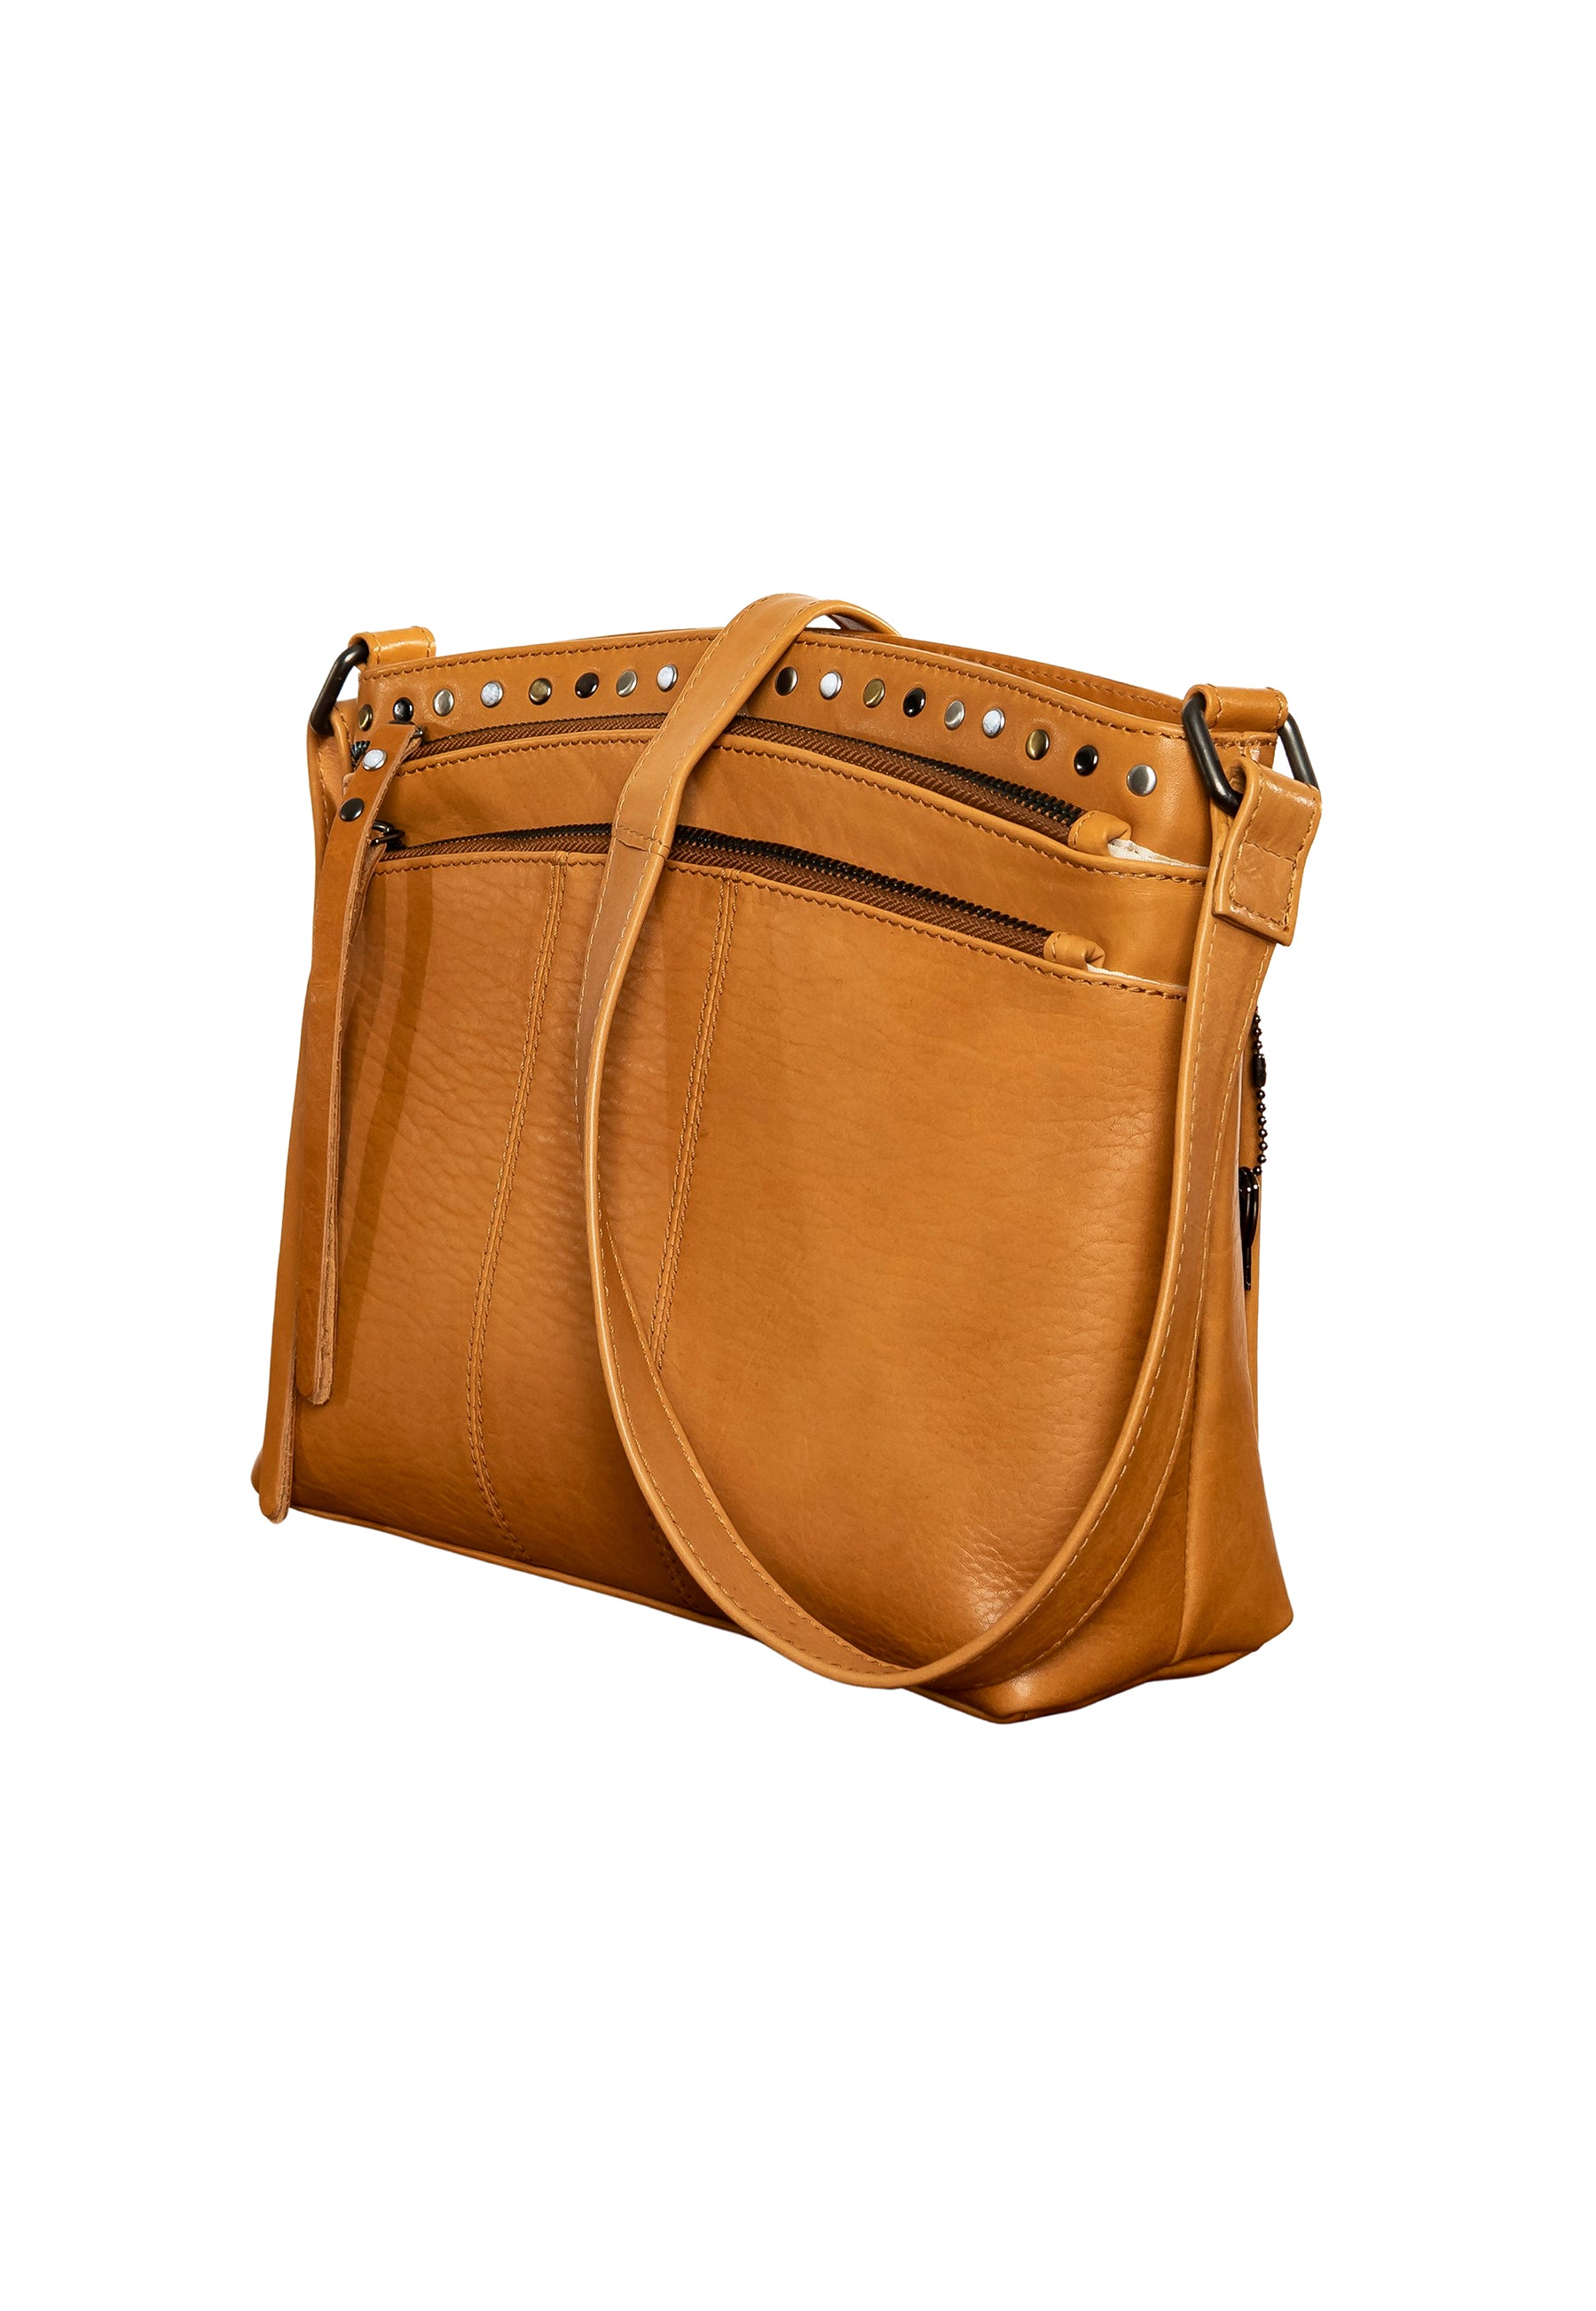 Caramel leather conceal carry bag